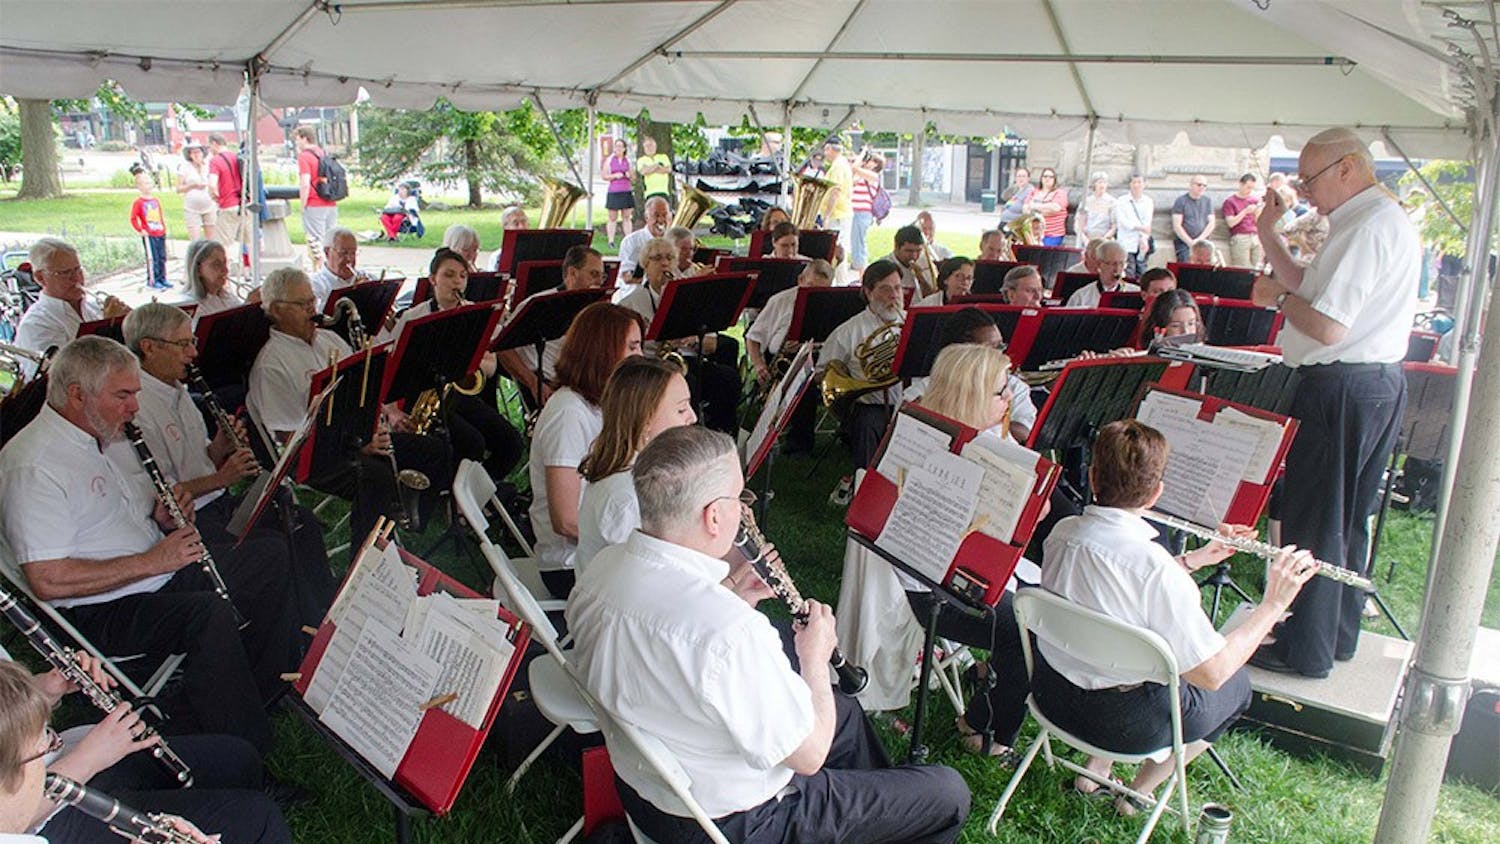 Bloomington Community Band perform at the July Fourth Pre-Parade Concert at the south side of the Bloomington Courthouse Square. The concert featured patriotic music, American classics, and favorite marches.